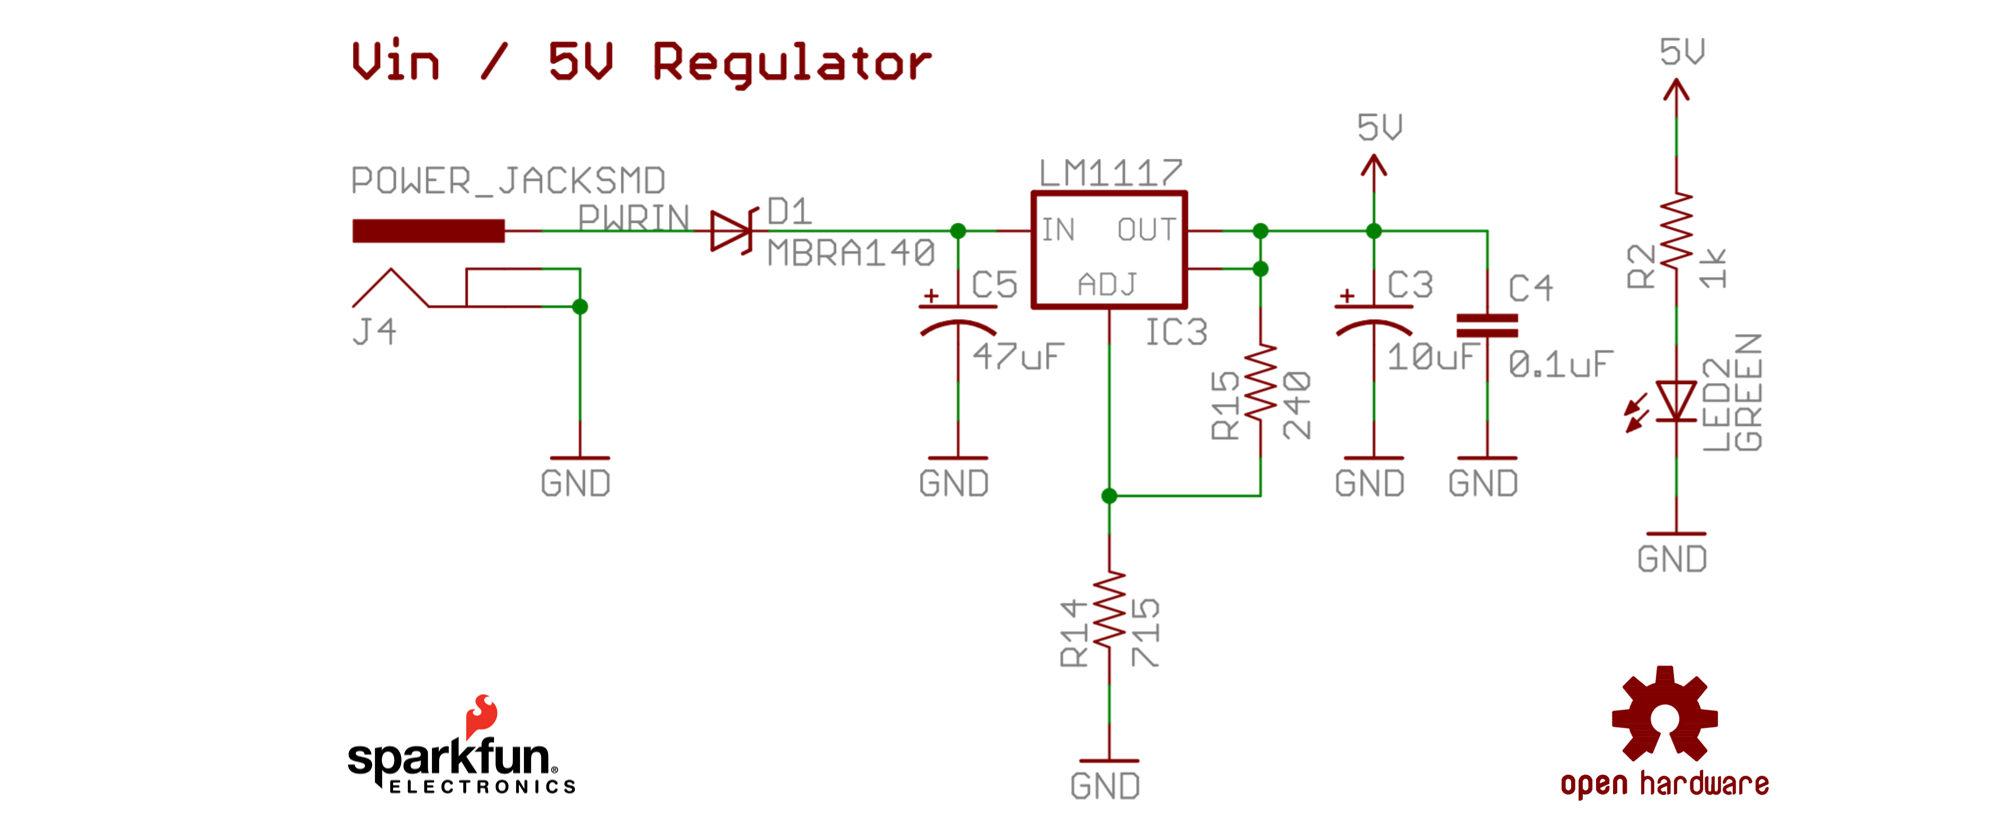 A circuit diagram of the 5V regulator on the RedBoard